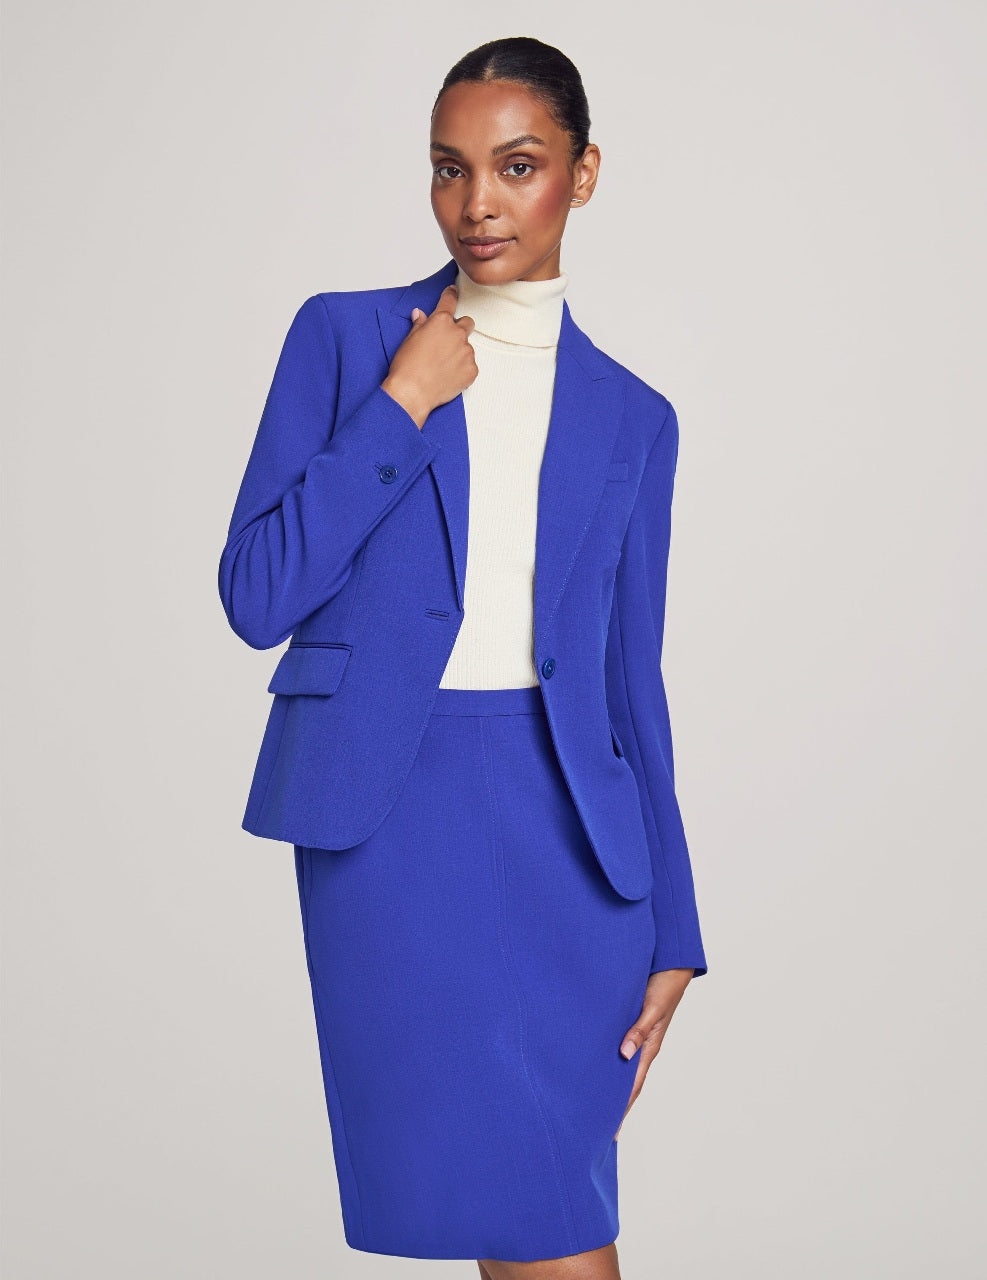 Anne Klein Royal Sapphire Executive Collection Jacket and Skirt Suit Set